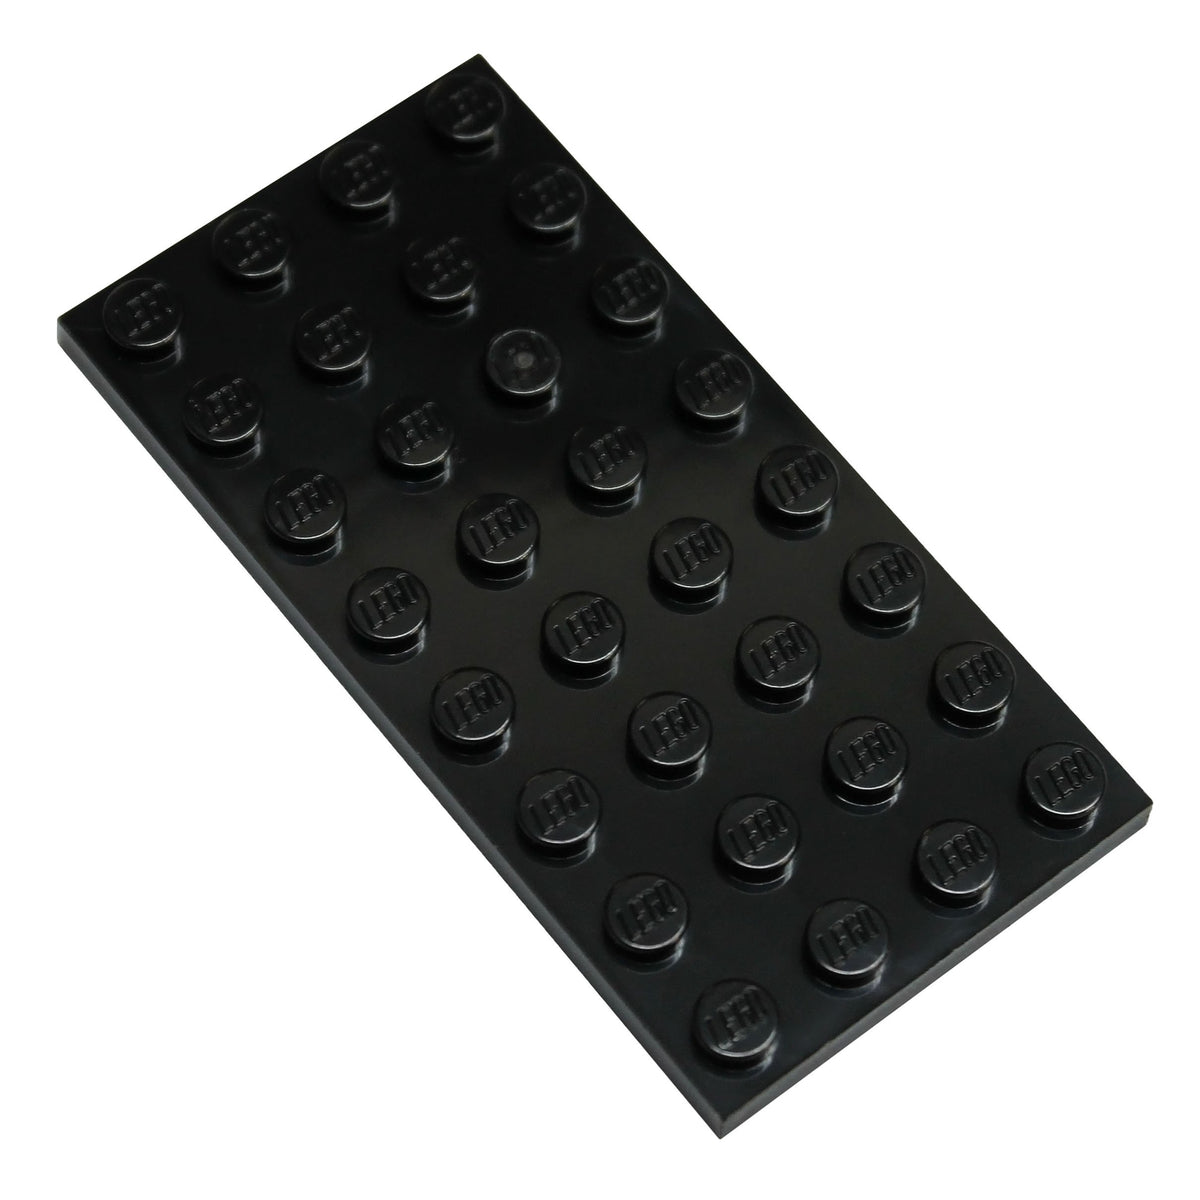 LEGO Parts and Pieces: Black 4x8 Plate x4